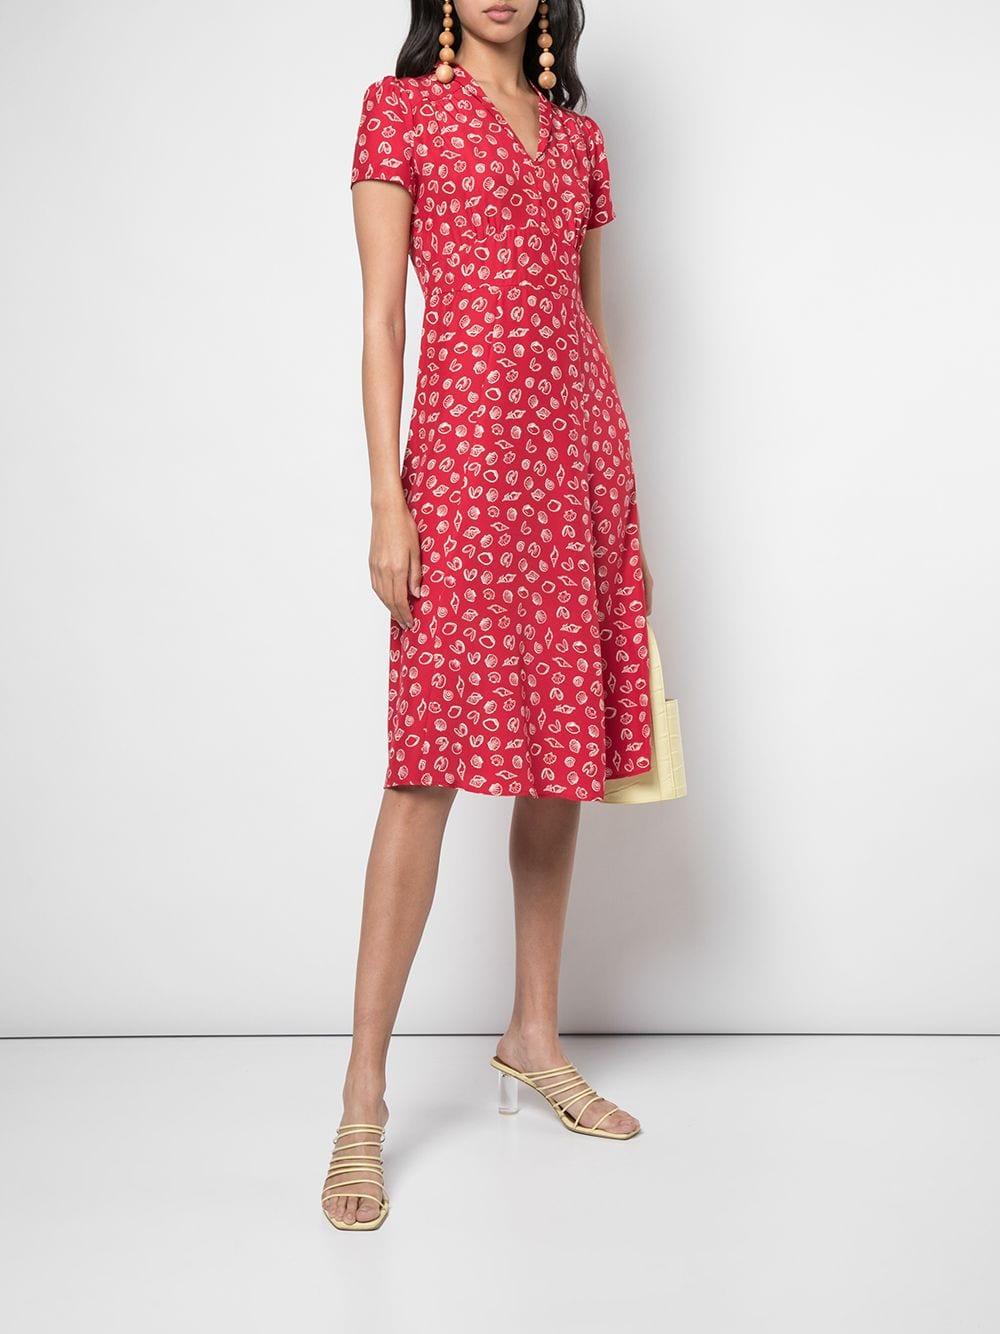 HVN Shell Print Shirt Dress in Red - Lyst